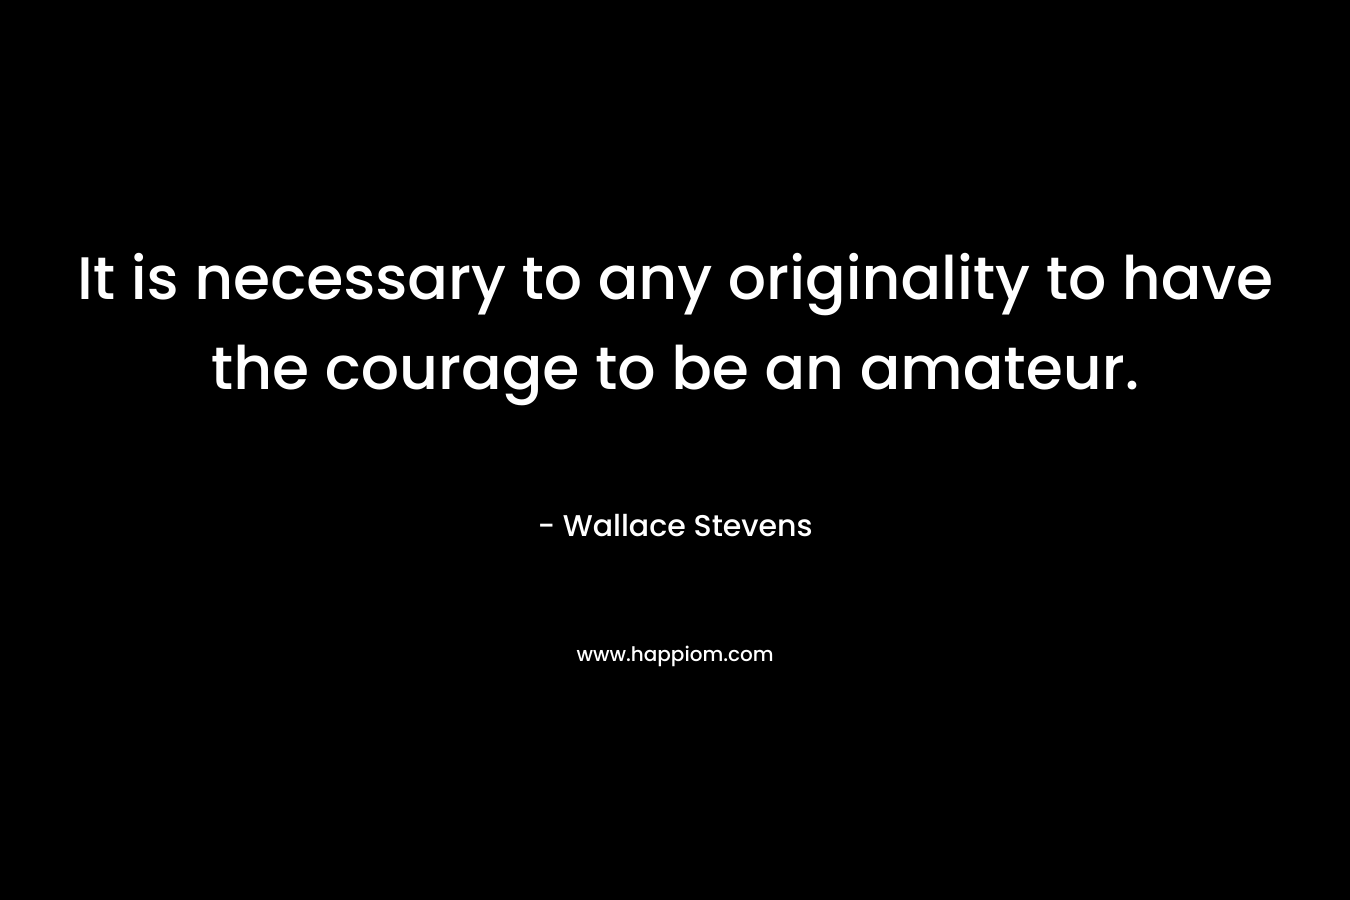 It is necessary to any originality to have the courage to be an amateur.